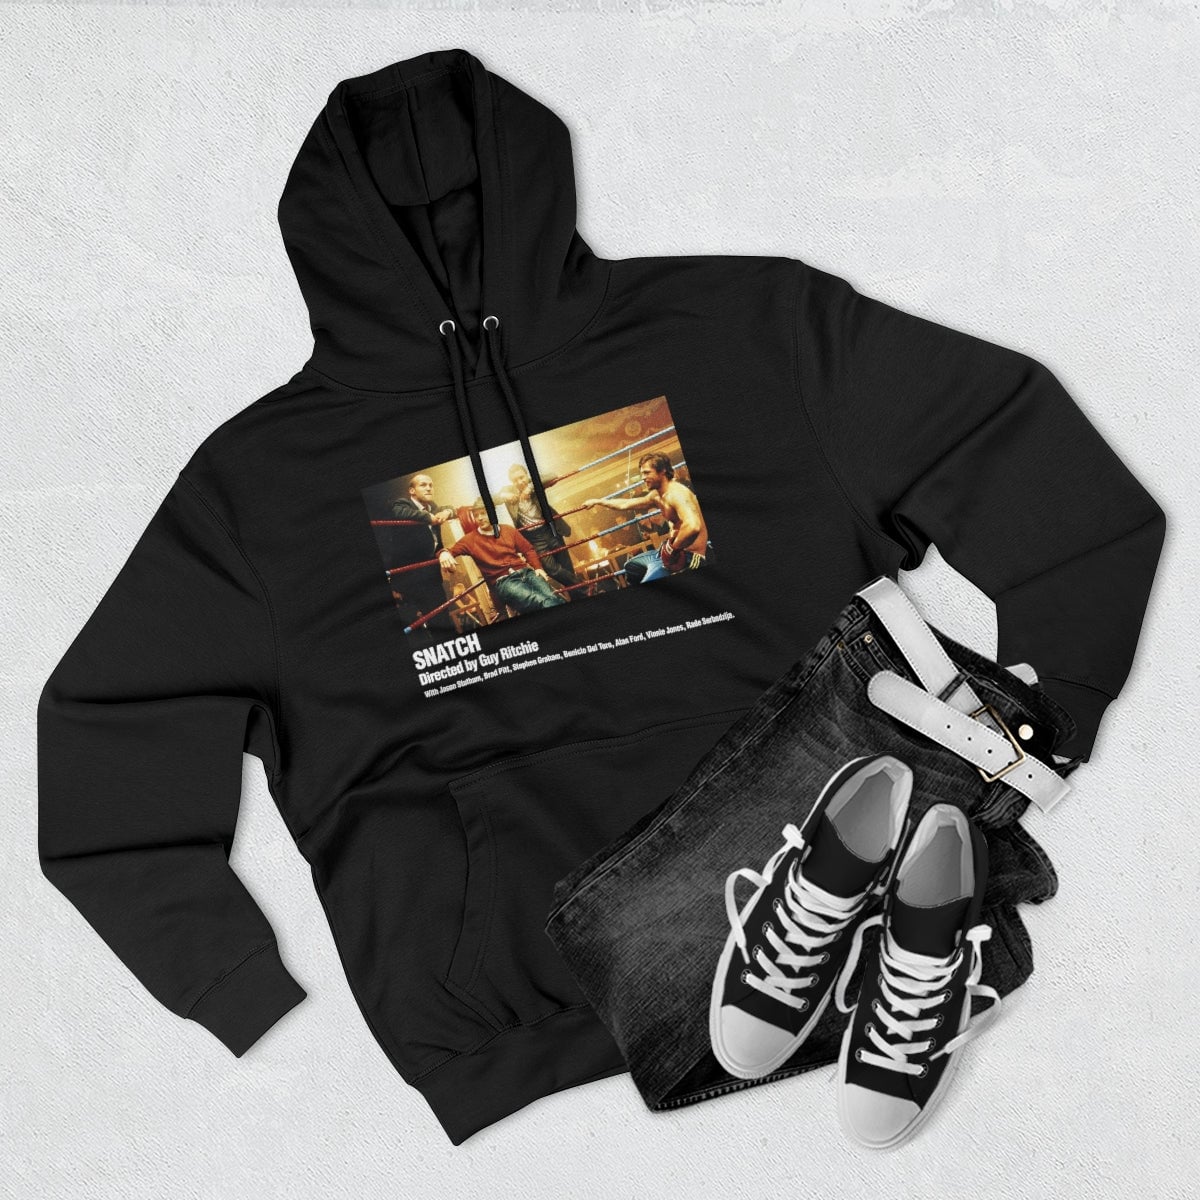 Snatch Behind The Scenes Directed By Guy Ritchie Pullover Hoodie